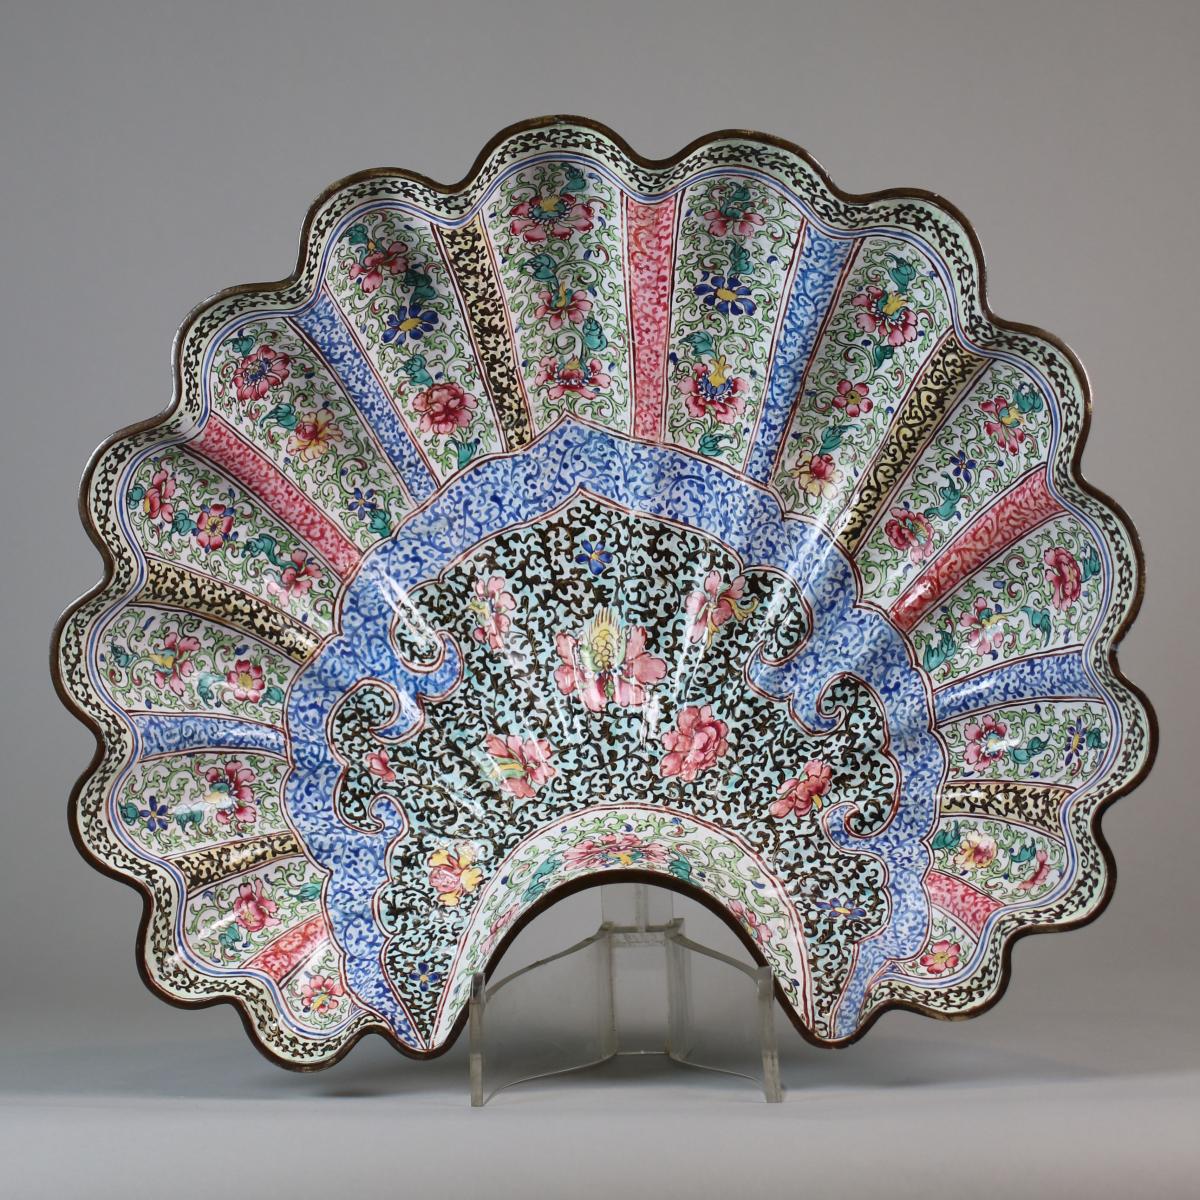 Chinese Canton enamel shell basin and ewer, mid 18th century d